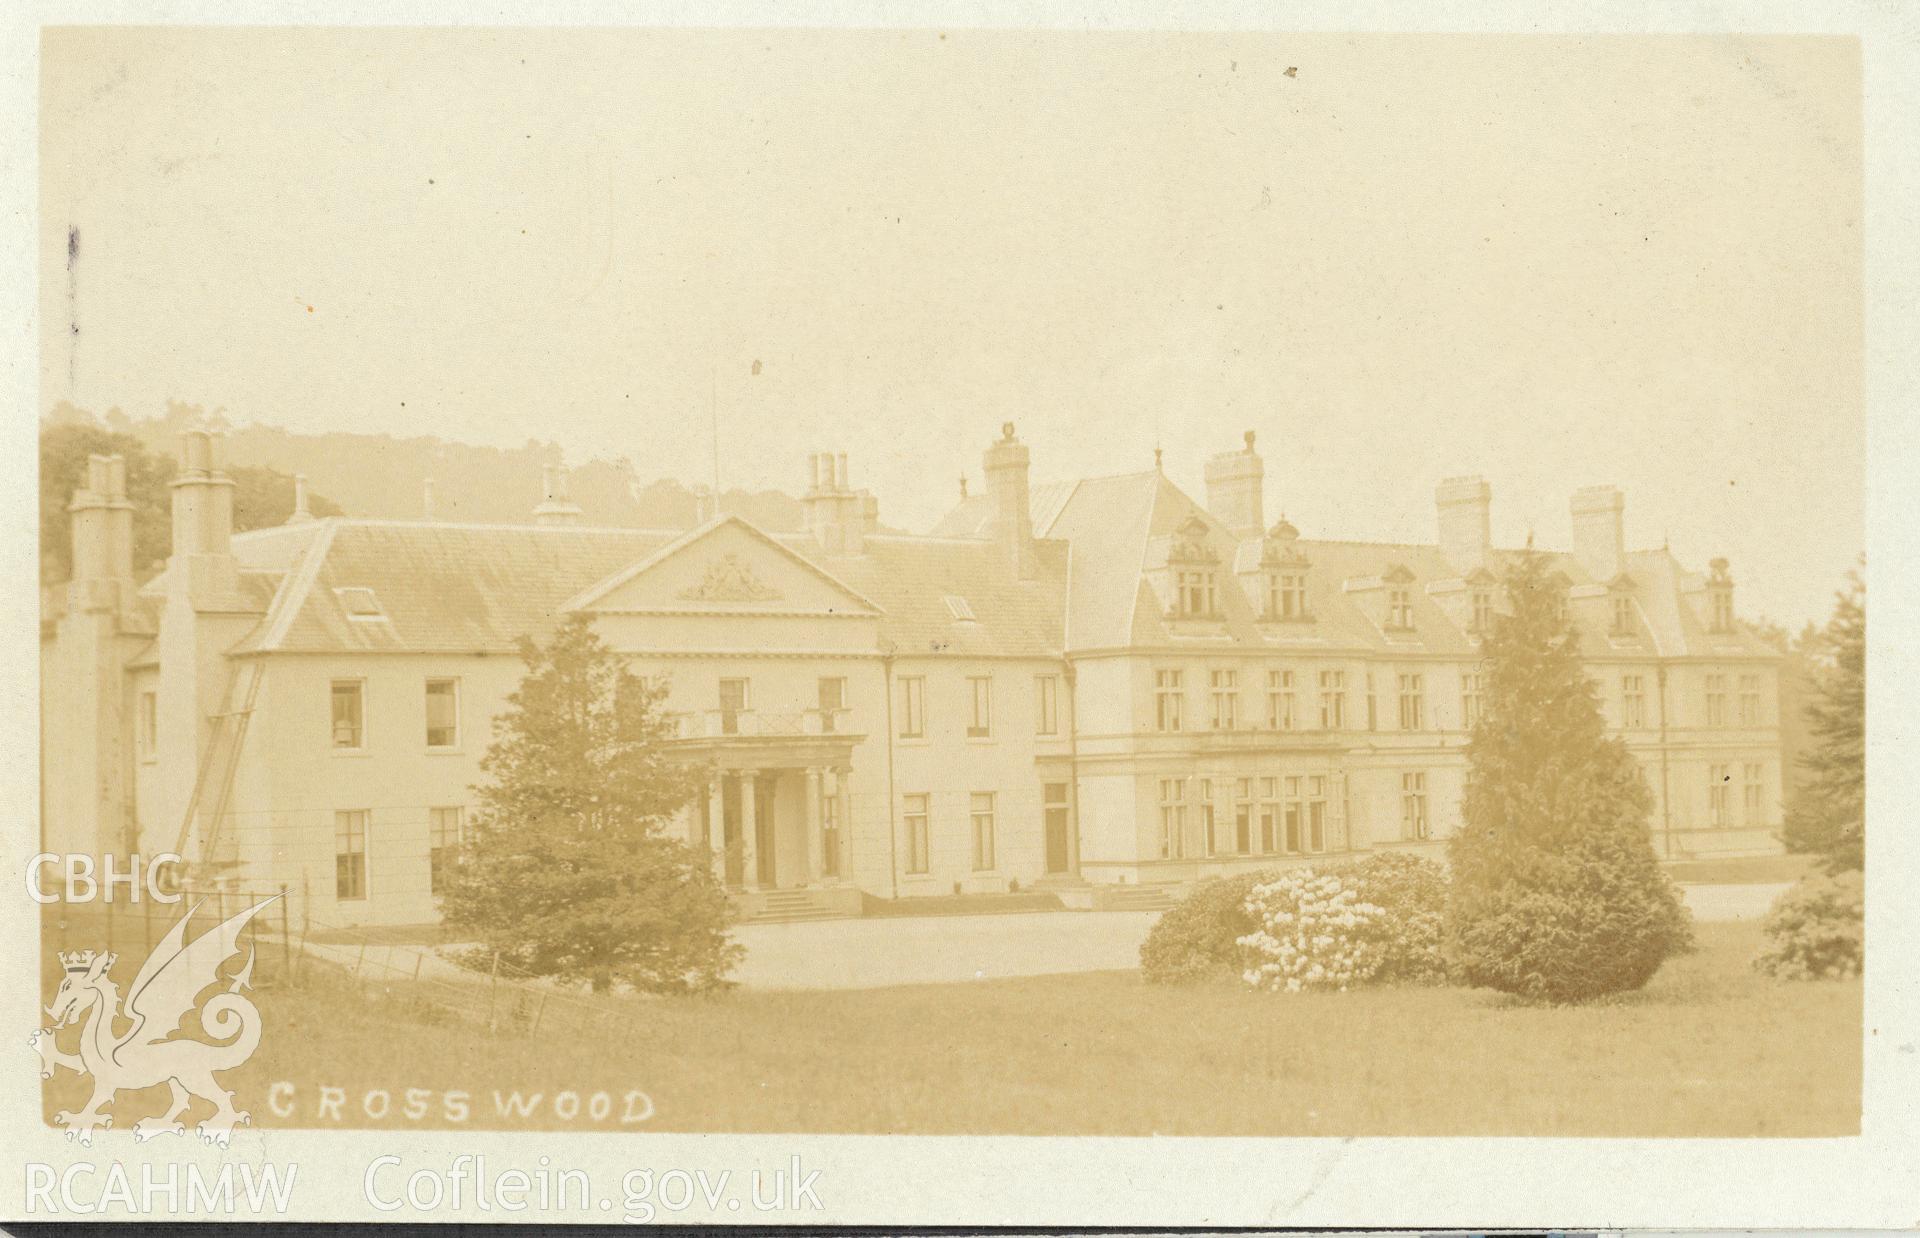 Digitised postcard image of Trawscoed Mansion. Produced by Parks and Gardens Data Services, from an original item in the Peter Davis Collection at Parks and Gardens UK. We hold only web-resolution images of this collection, suitable for viewing on screen and for research purposes only. We do not hold the original images, or publication quality scans.